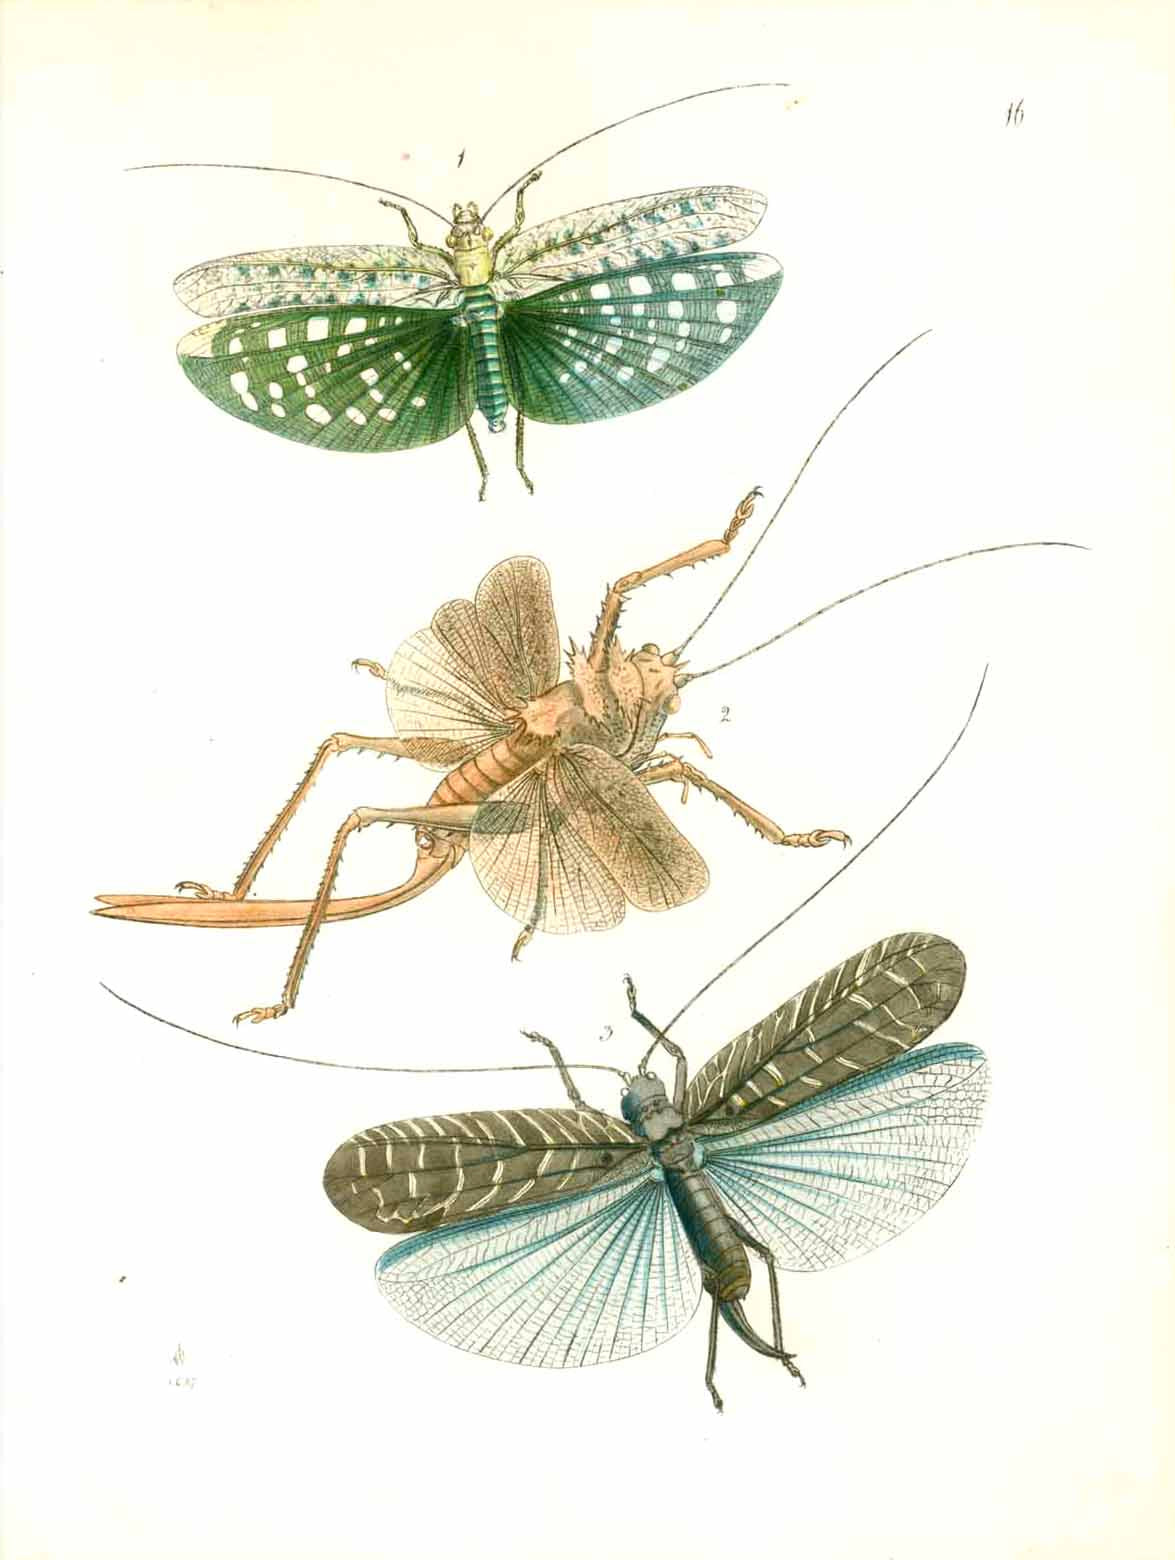  No Title  Fine lithograpph dated 1847. Printed in attractive color.  Original antique print , Insects